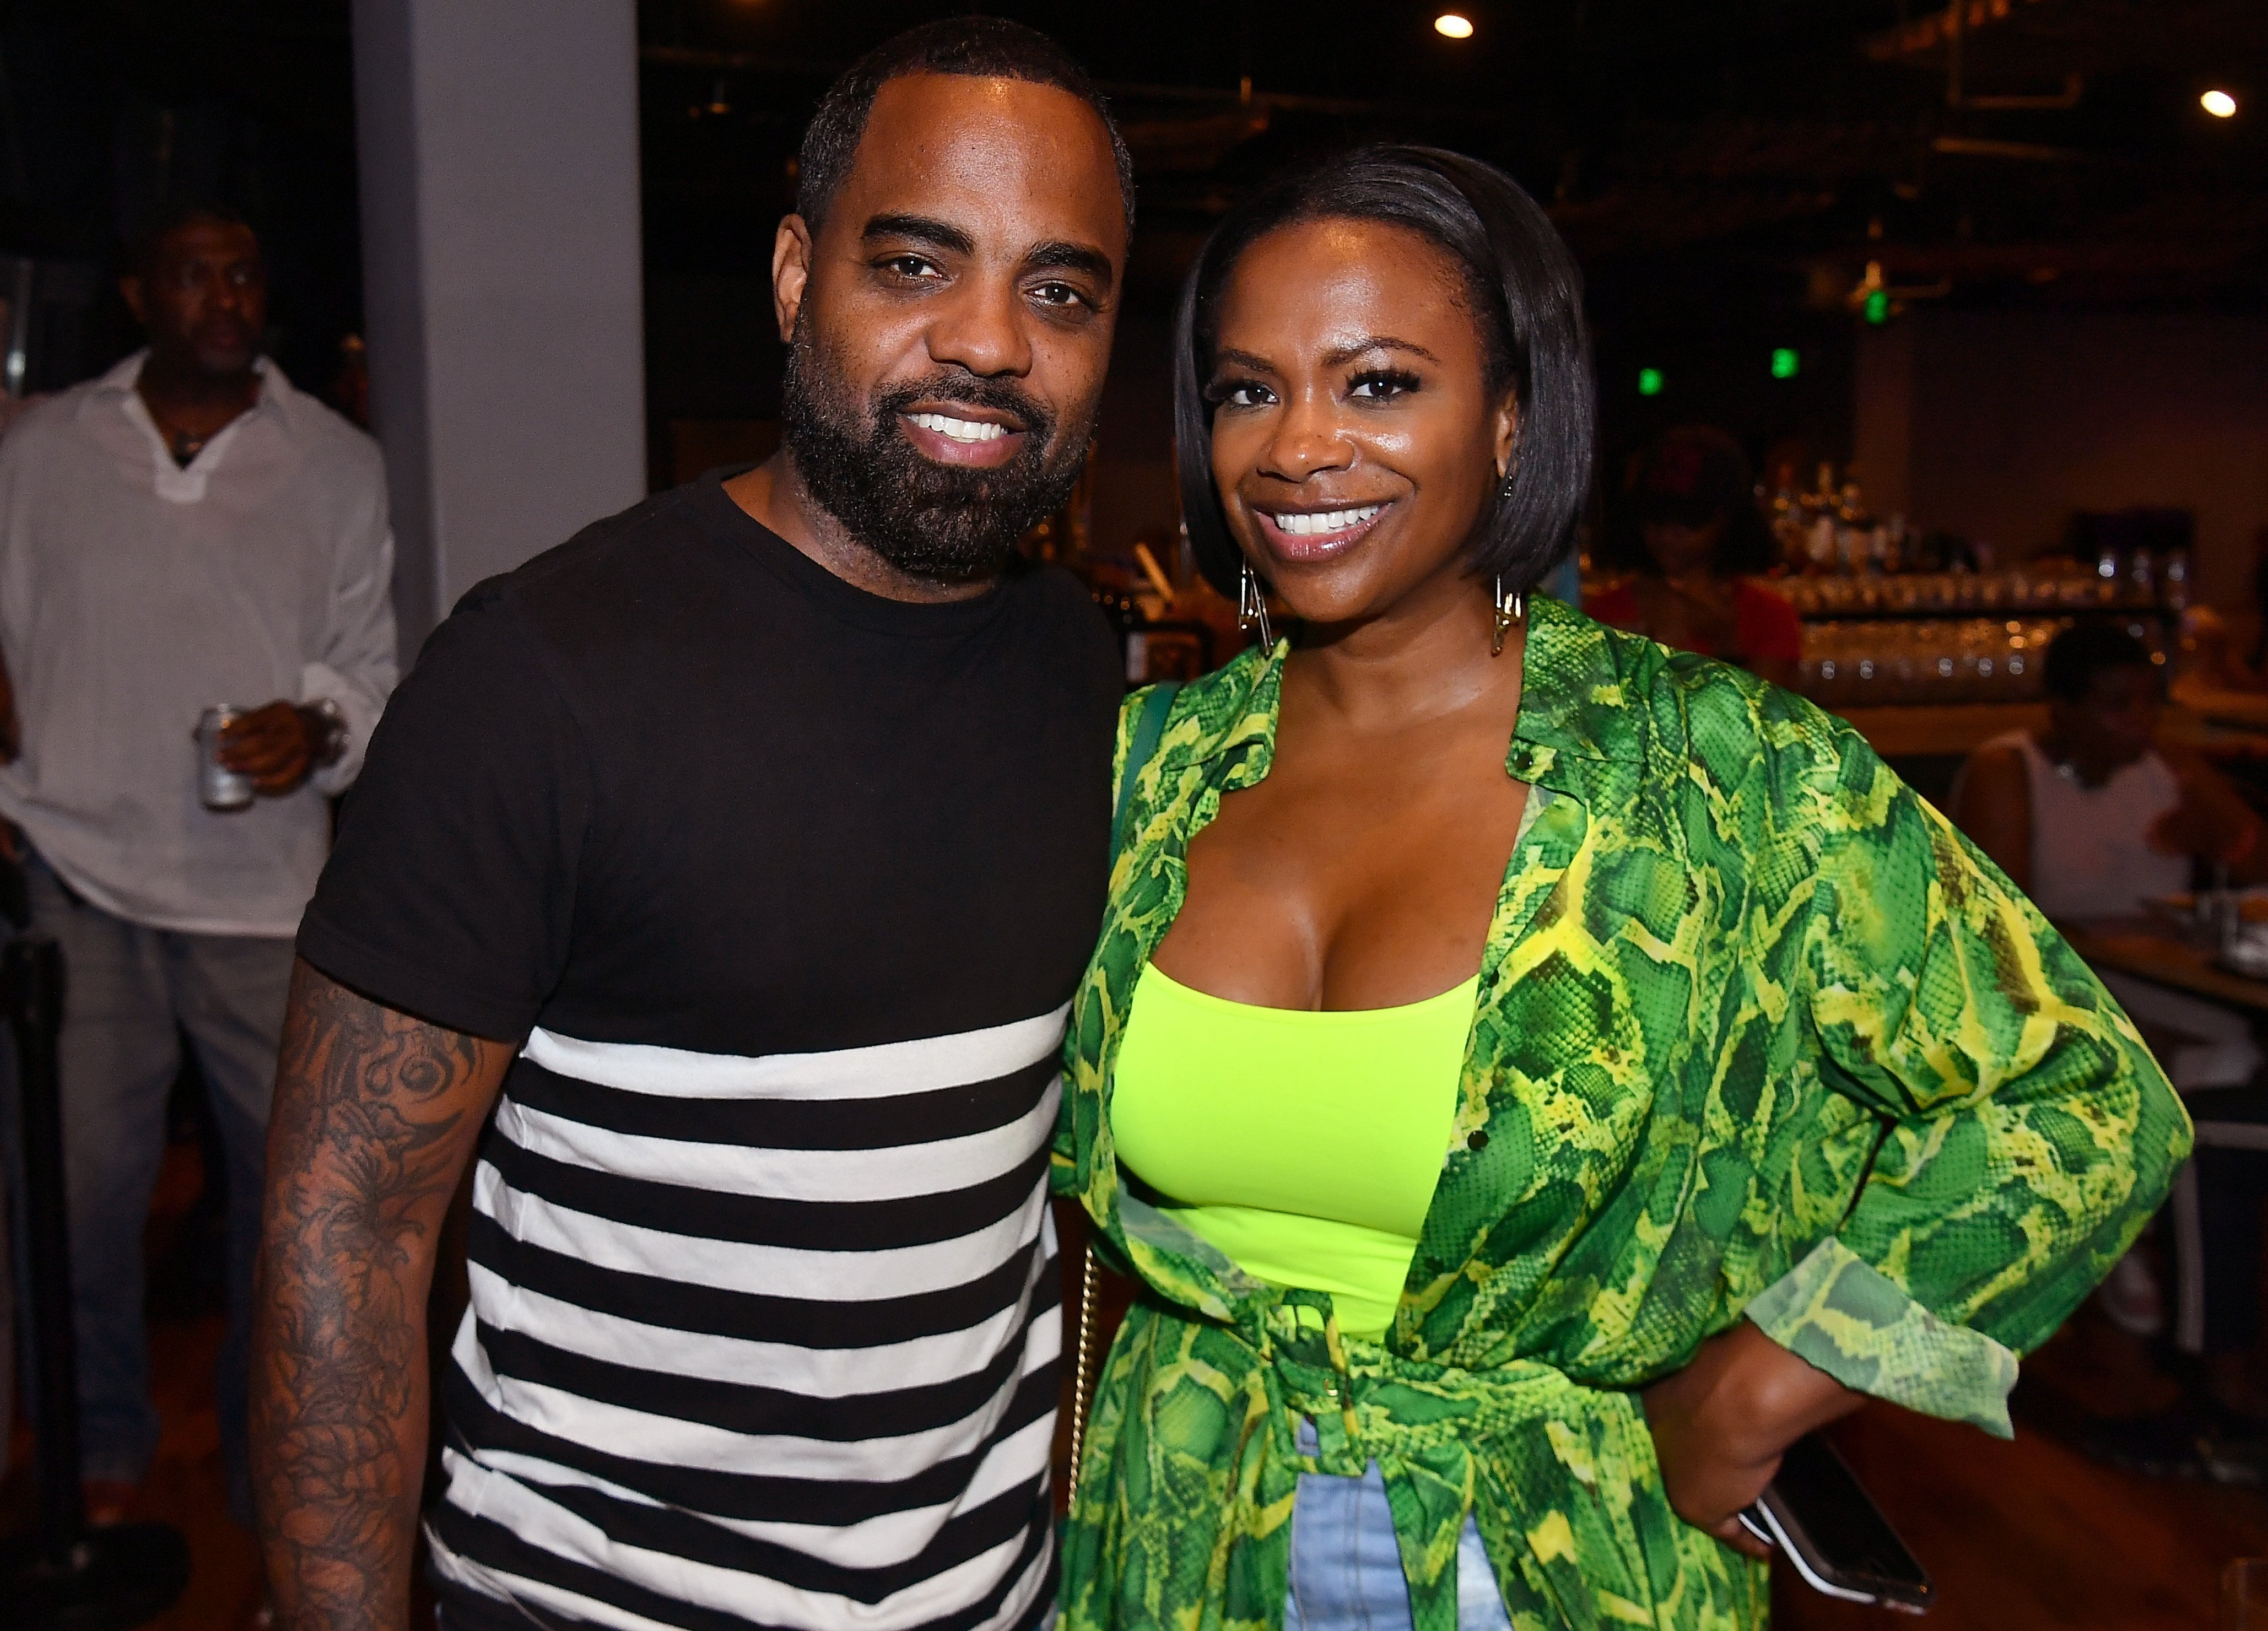 Todd Tucker and Kandi Burruss attend "Majic 107.5 After Dark" at Atlanta, Georgia in September 2019. | Photo: Getty Images